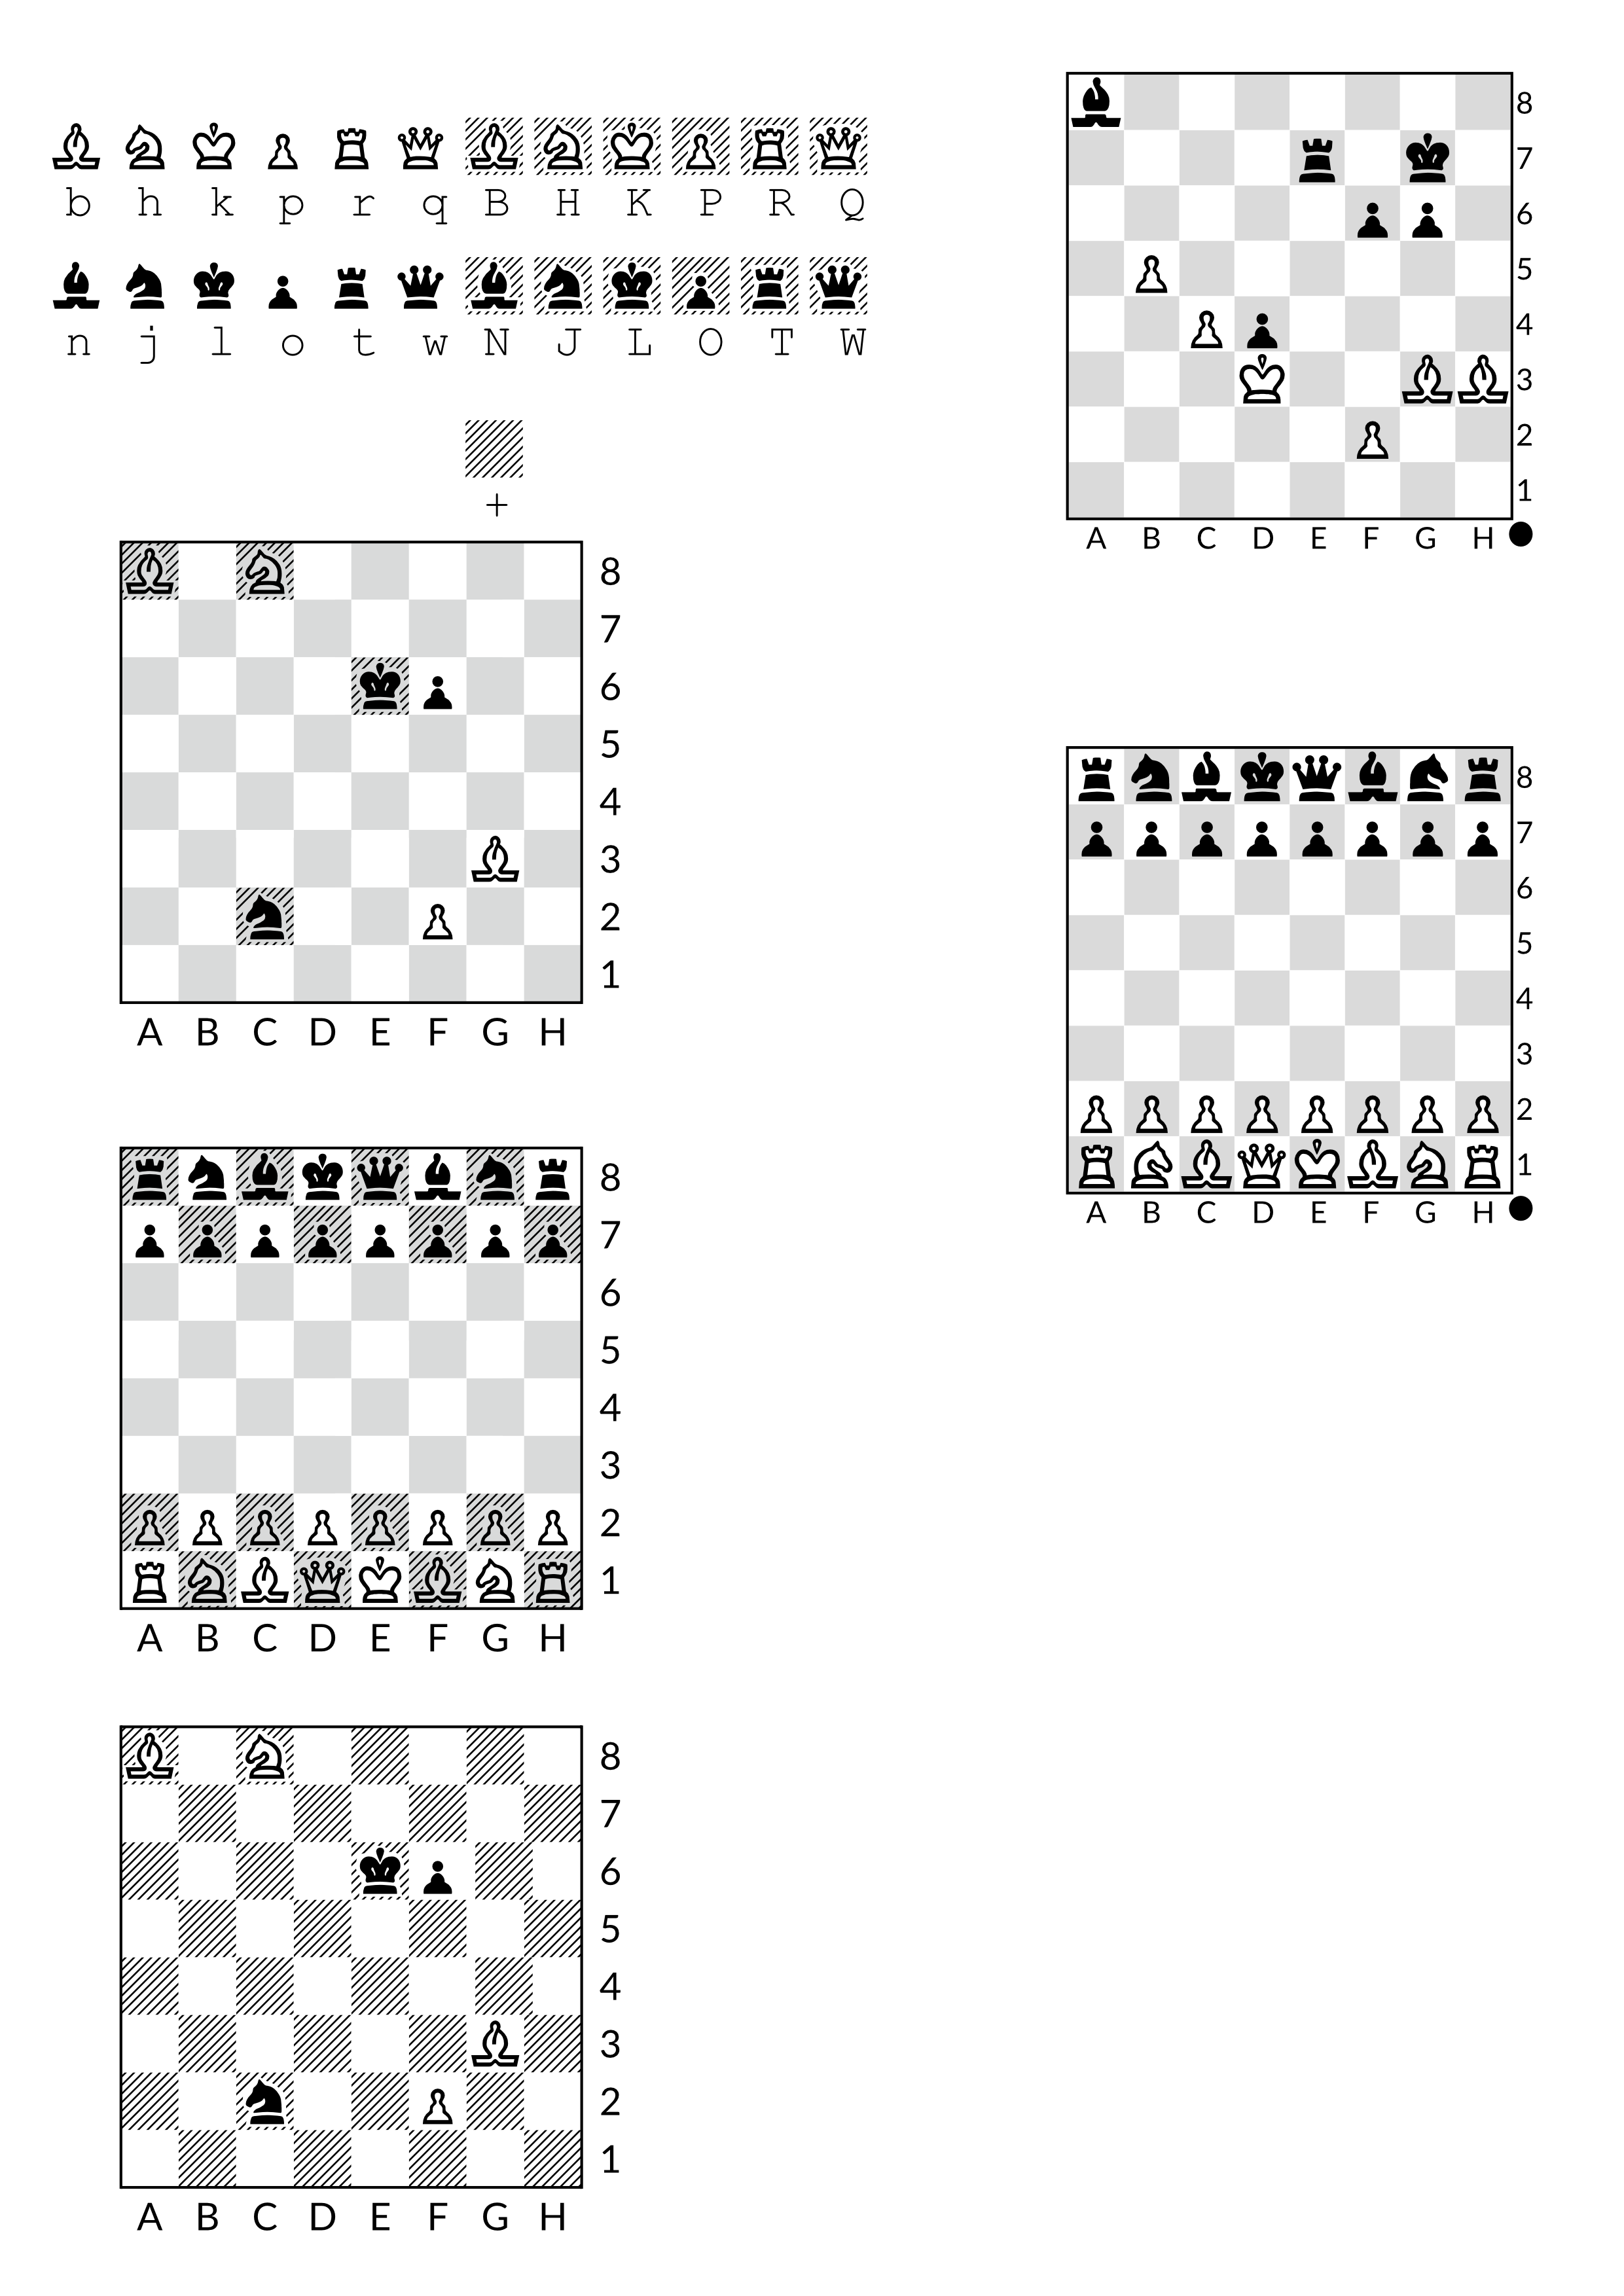 Crossword puzzle - Chess Forums 